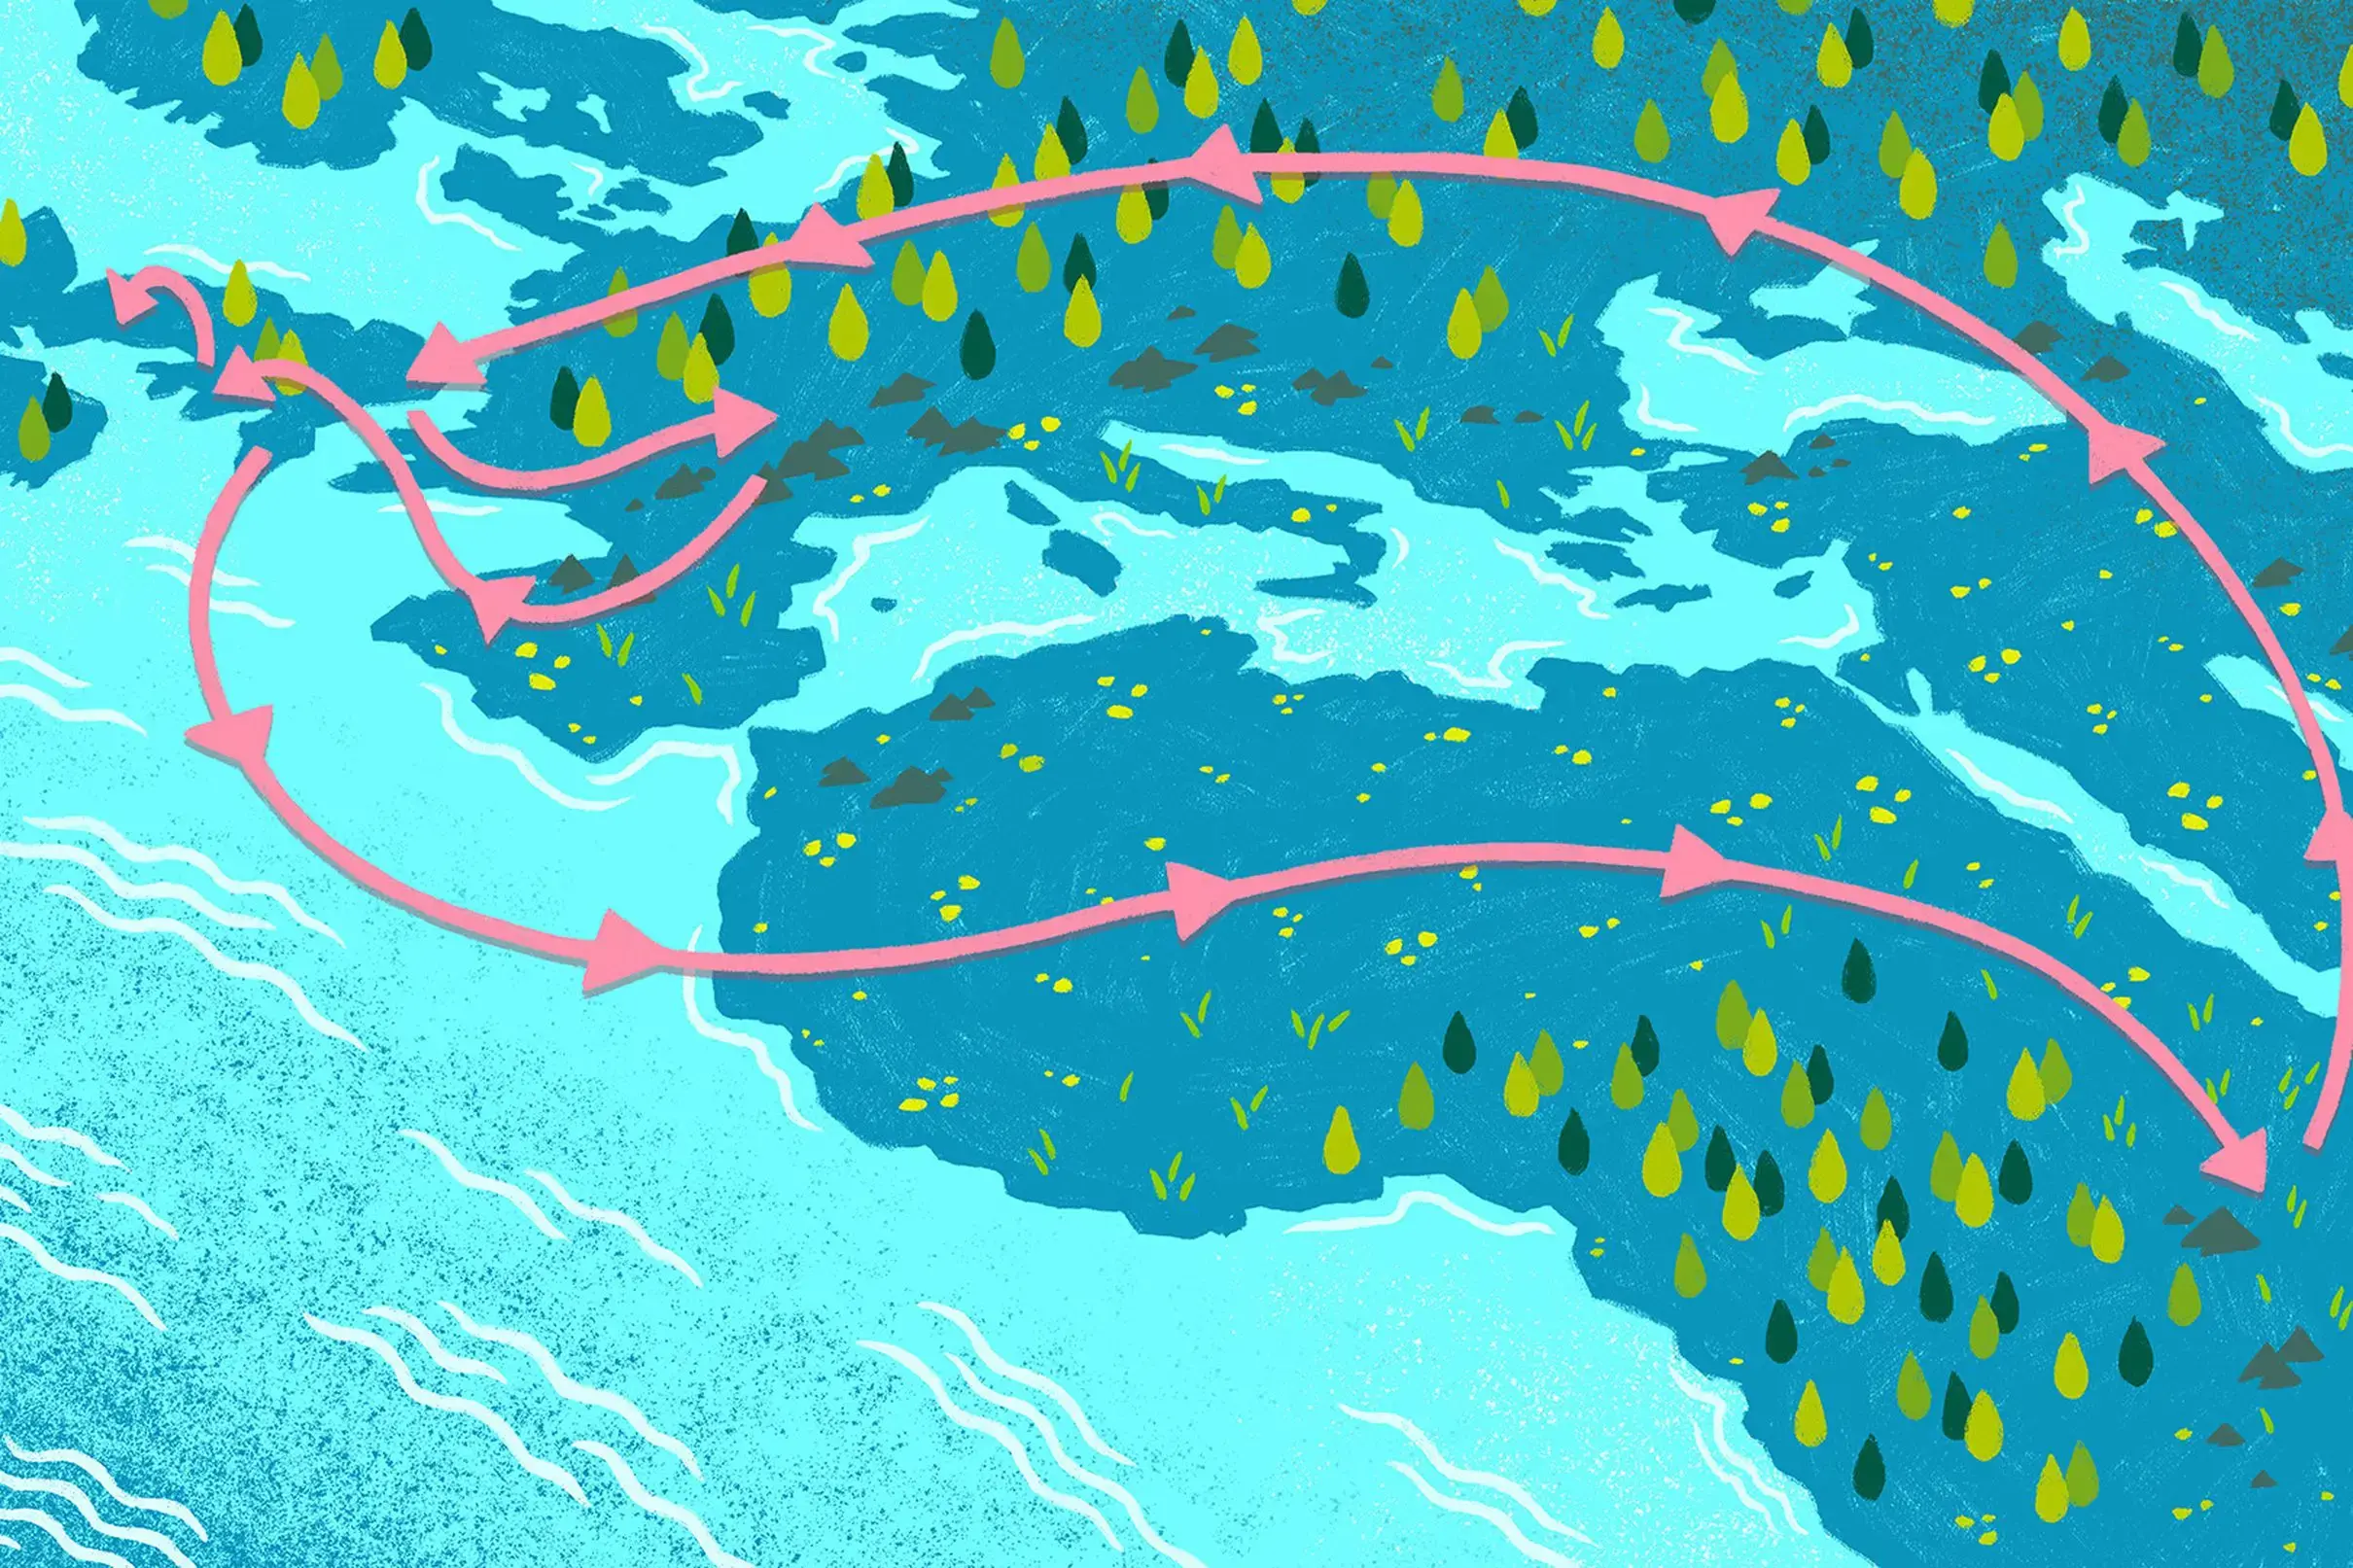 Stylized illustration of flows of carbon credits moving between Africa and Europe